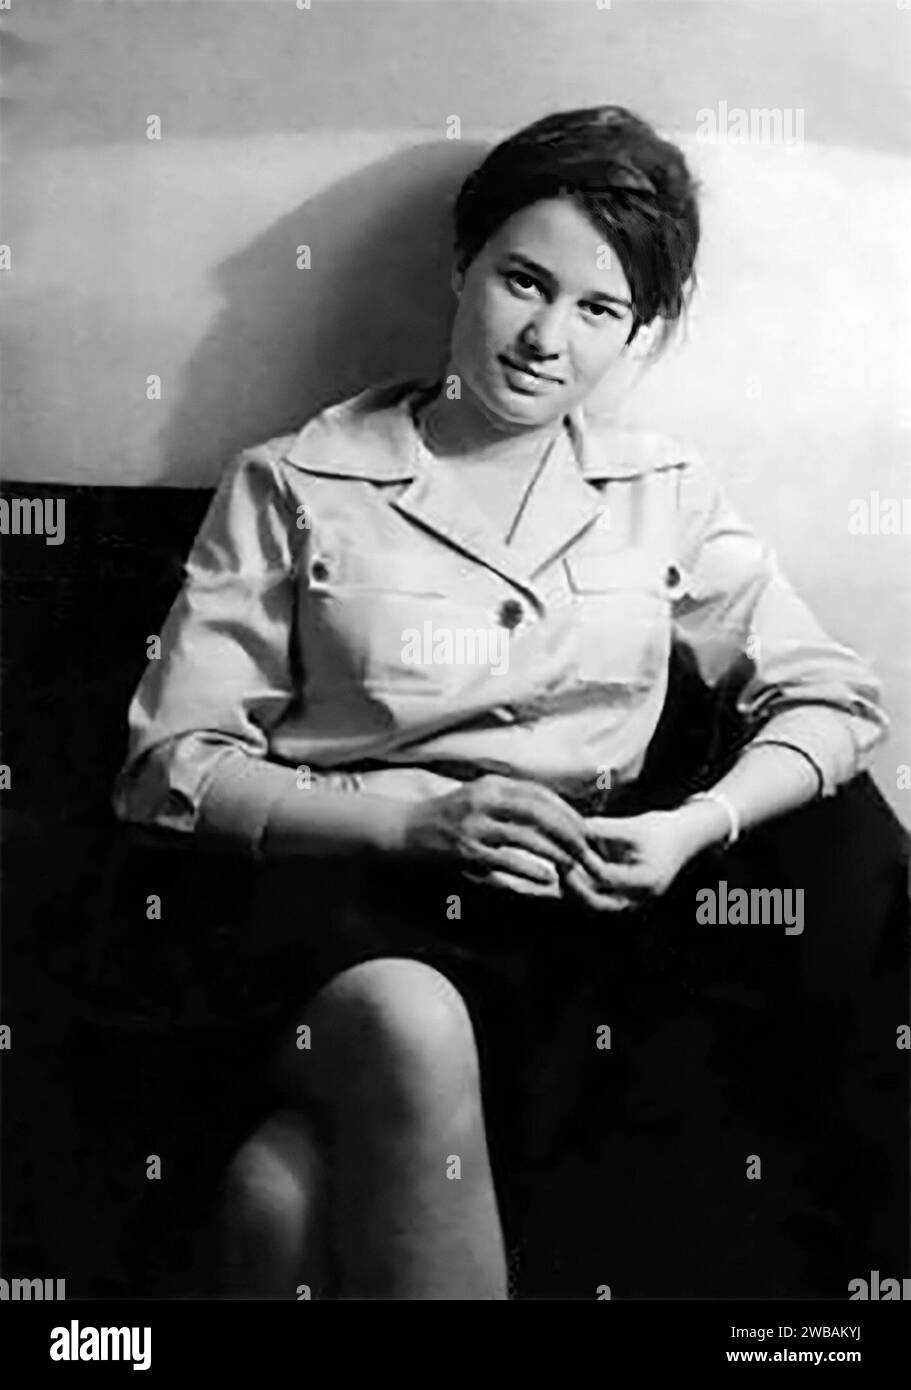 Ulrike Meinjof. Portrait of the German left-wing journalist and founder of the Red Army Faction, Ulrike Marie Meinhof (1934-1976), c. 1964 Stock Photo